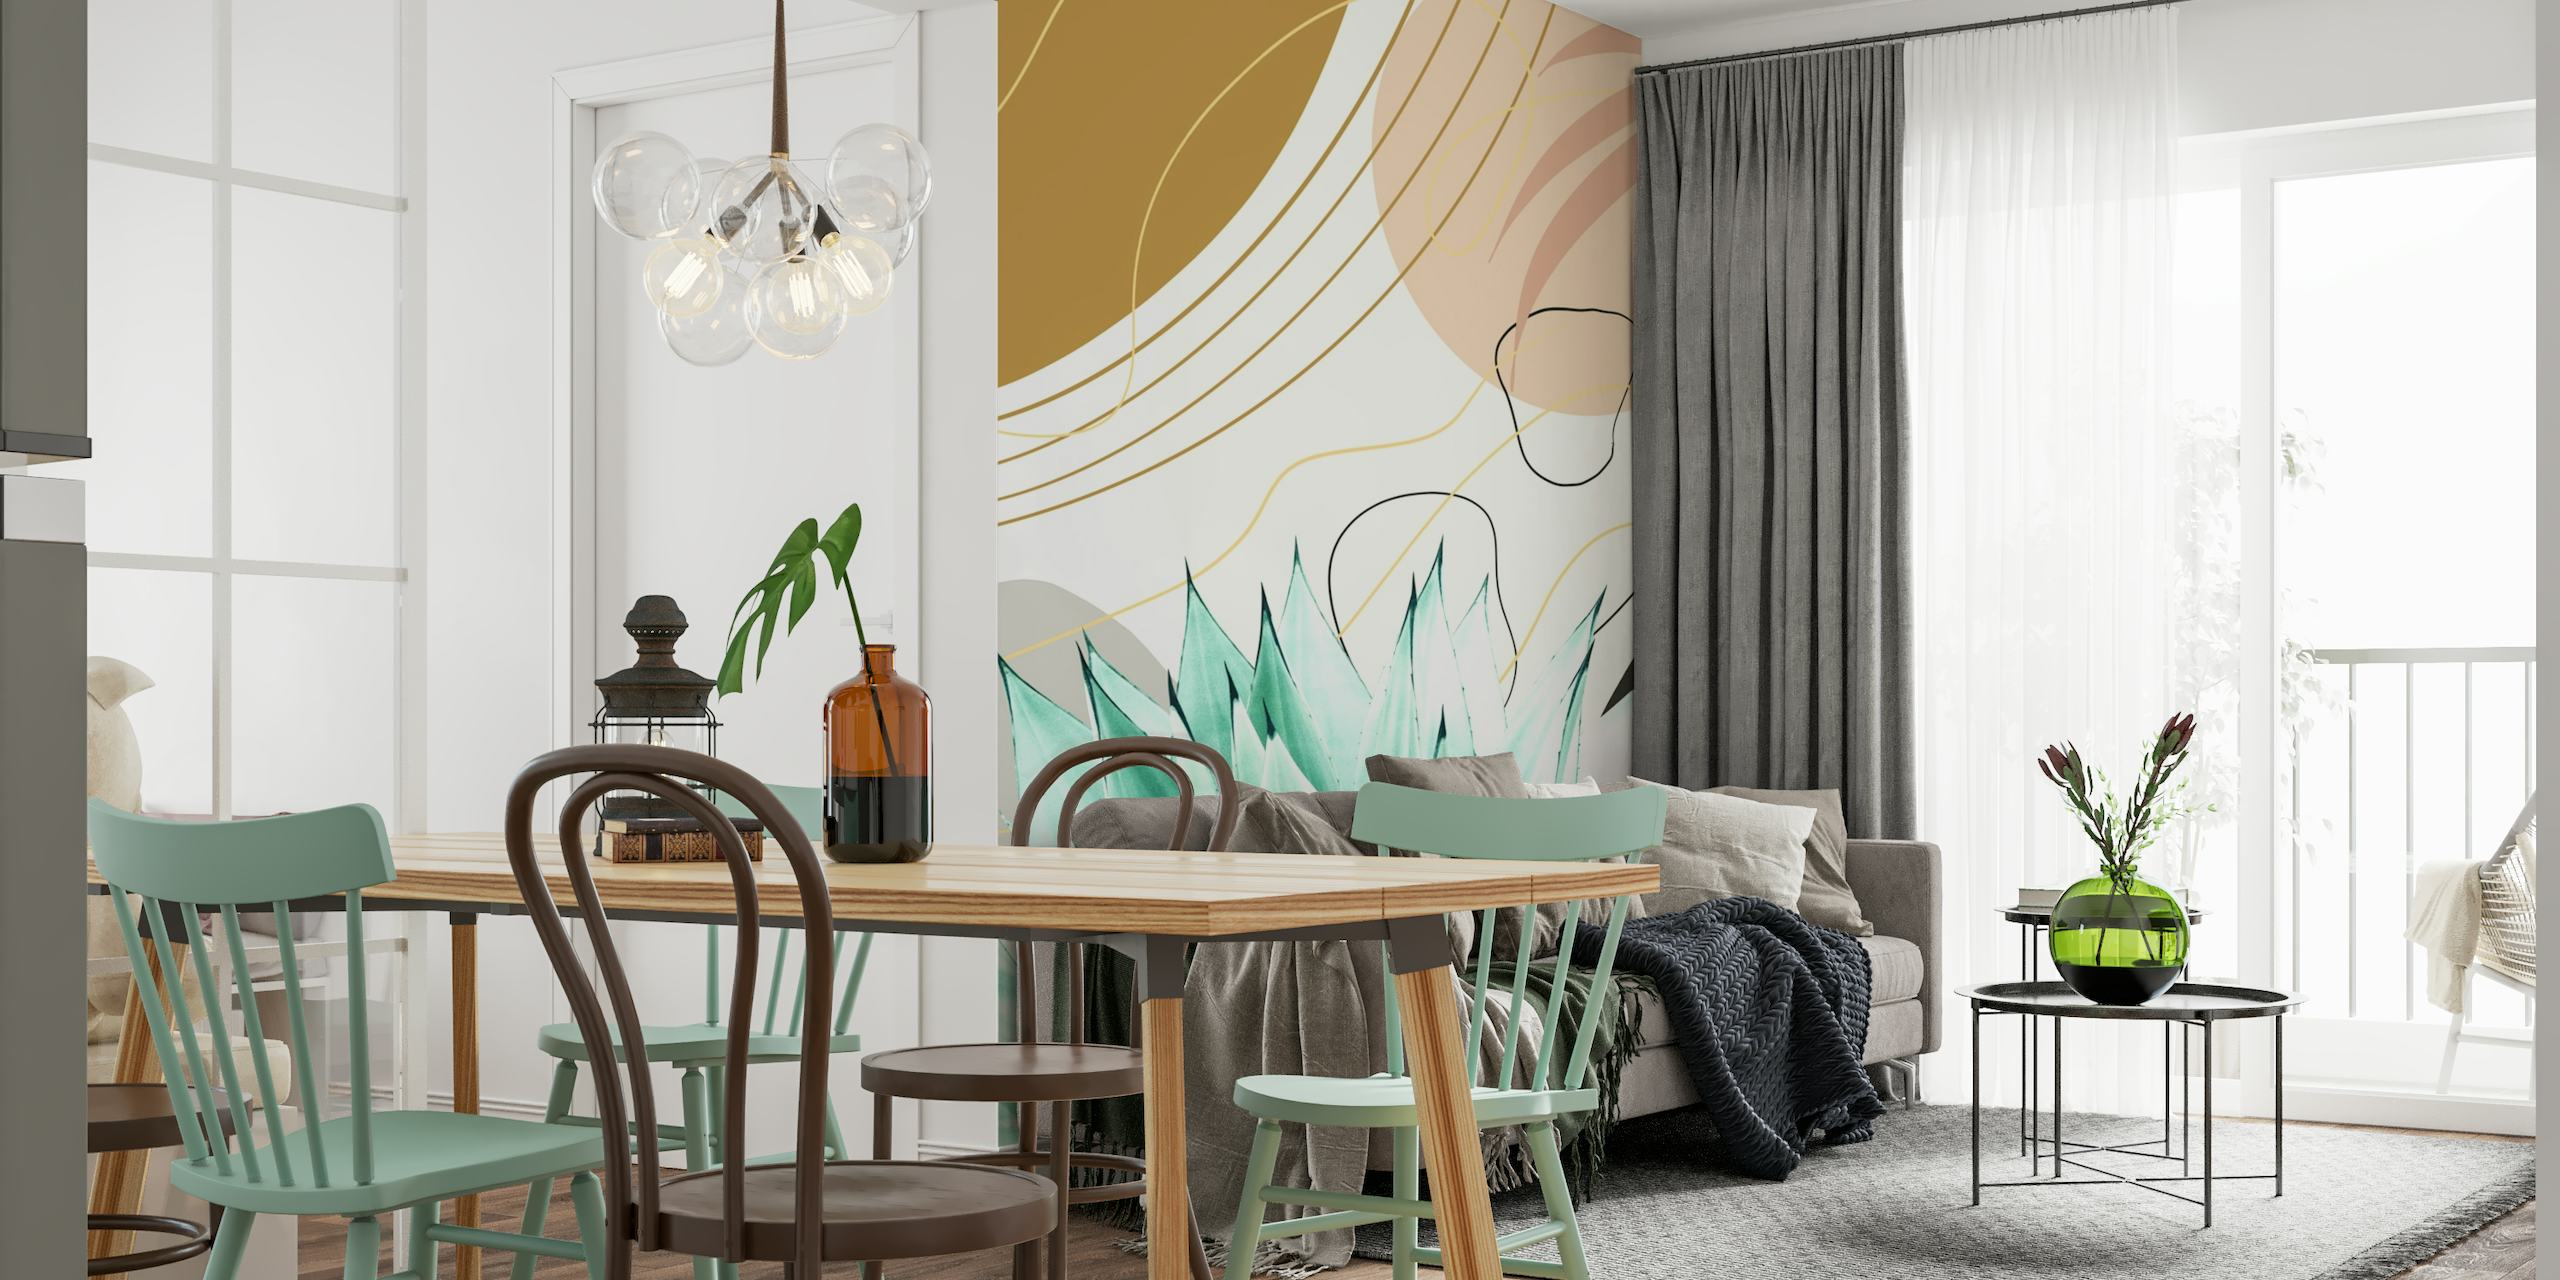 Stylized agave plant in an abstract design with taupe, cream, and gold accents on a wall mural